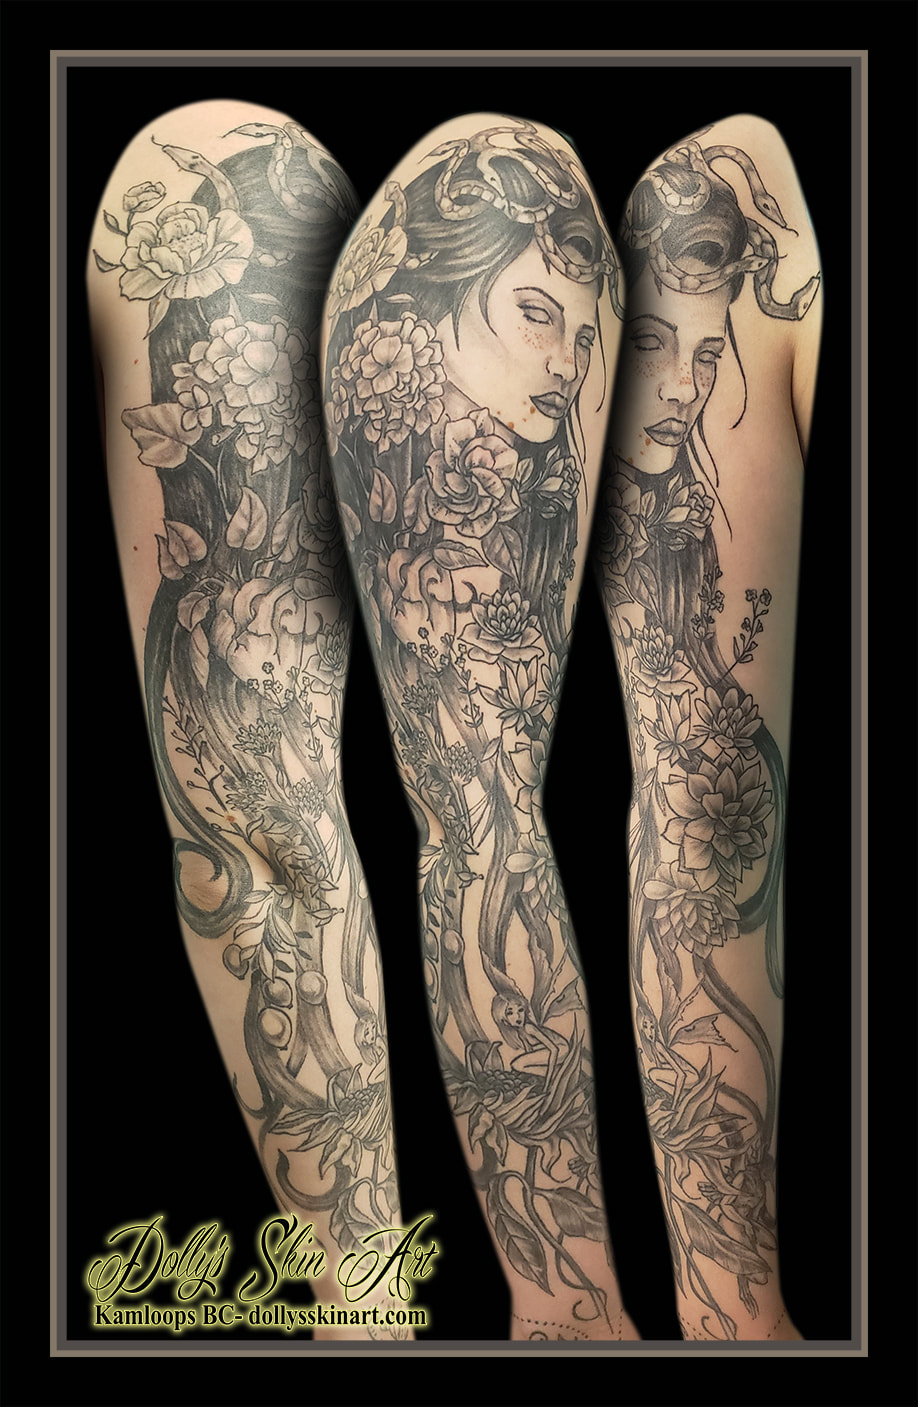 black and grey sleeve tattoo medusa lady flowers anatomical heart fairy berries floral shading tattoo kamloops dolly's skin art